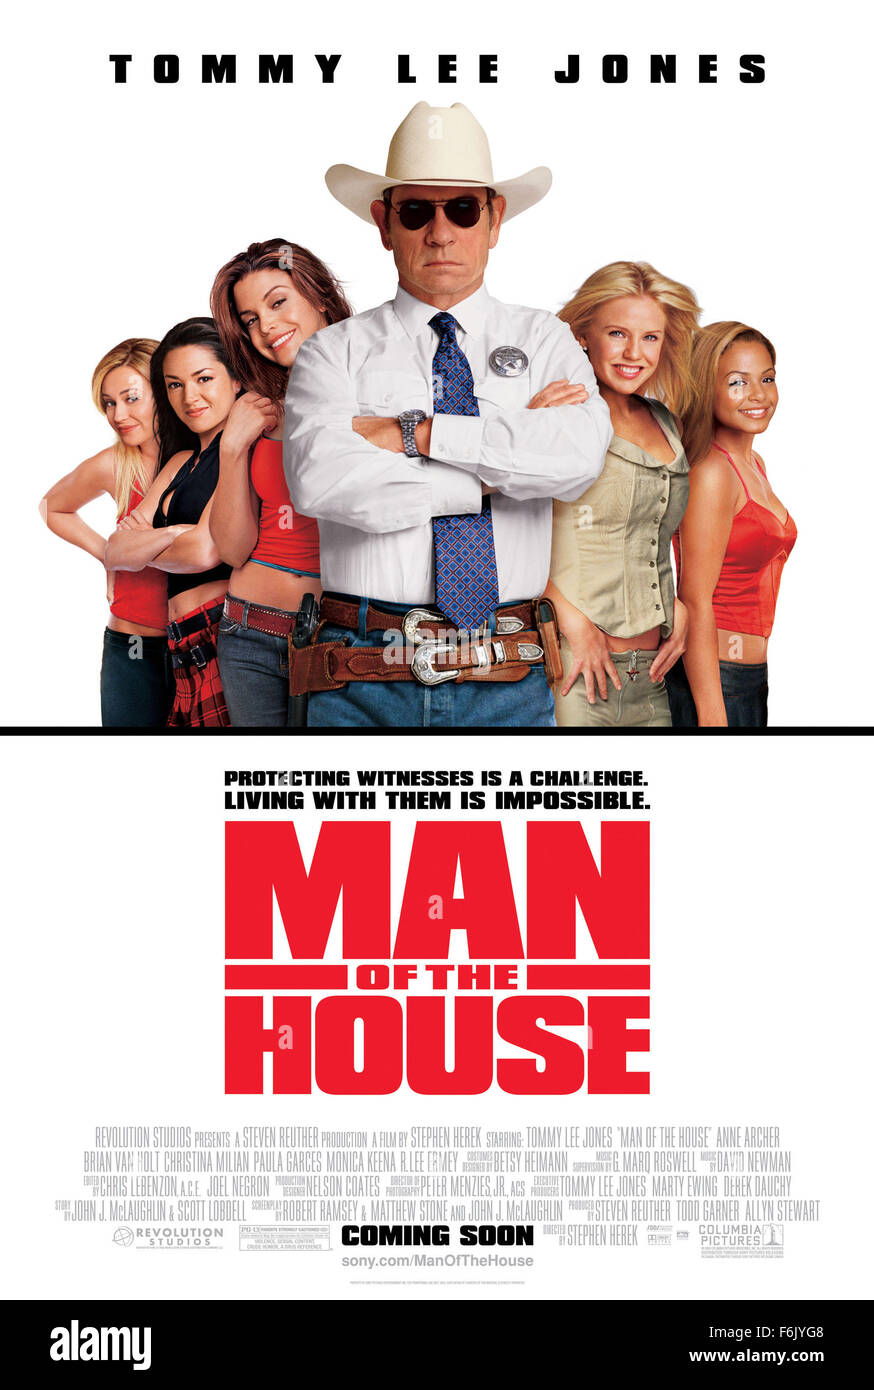 RELEASE DATE: February 25, 2005   MOVIE TITLE: Man of the House   STUDIO: Revolution Studios   PLOT: Texas Ranger Roland Sharp is assigned to protect the only witnesses to the murder of a key figure in the prosecution of a drug kingpin, a group of University of Texas cheerleaders. Sharp must now go undercover as an assistant cheerleading coach and move in with the young women. Directed by Stephen Herek.   PICTURED: Movie Poster   (Credit Image: c Revolution Studios/Entertainment Pictures) Stock Photo